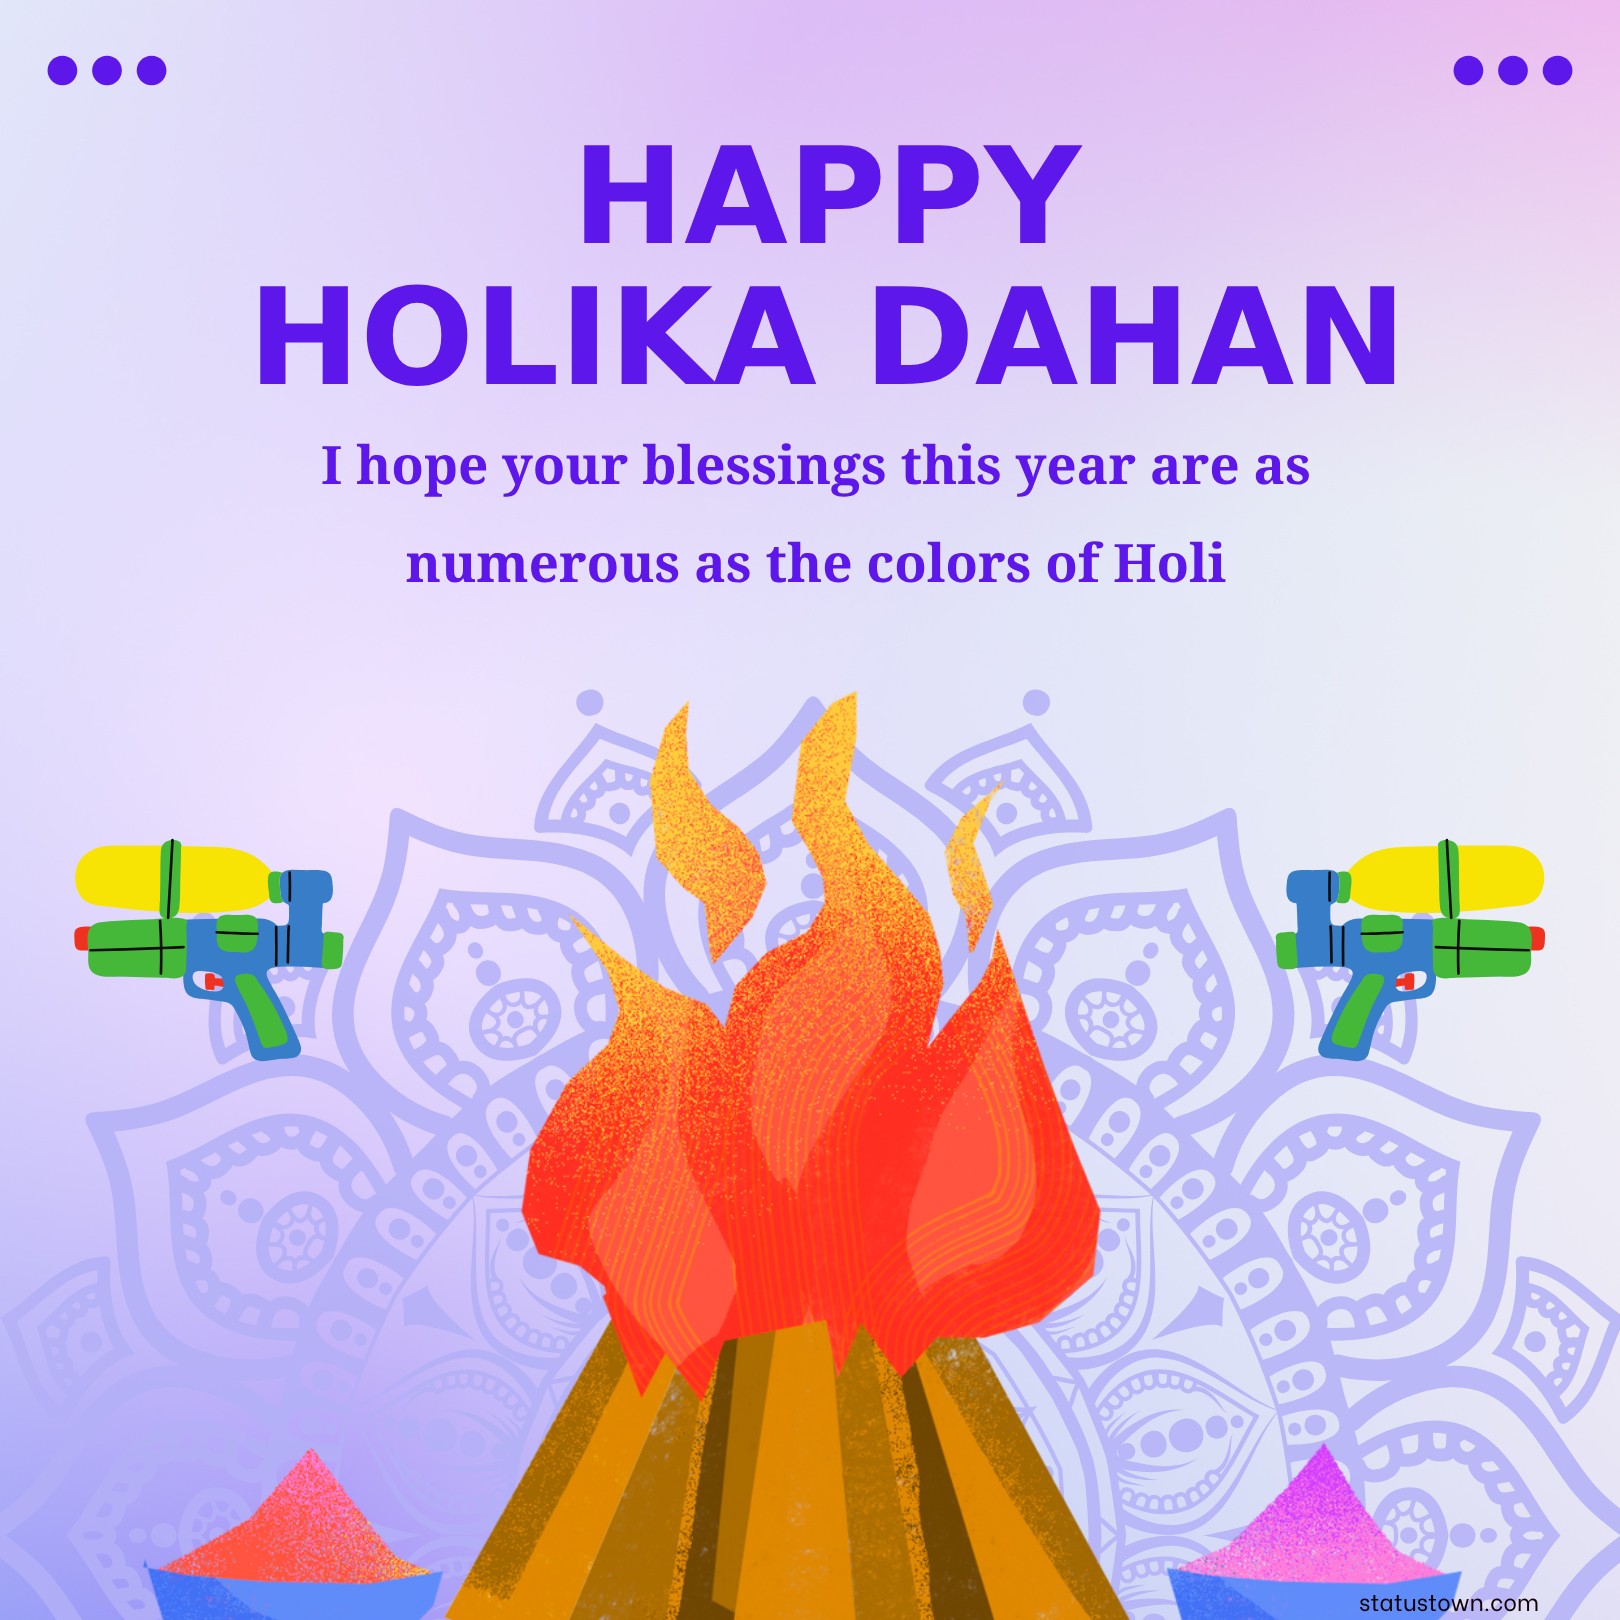 I hope your blessings this year are as numerous as the colors of Holi! - Holi Wishes wishes, messages, and status